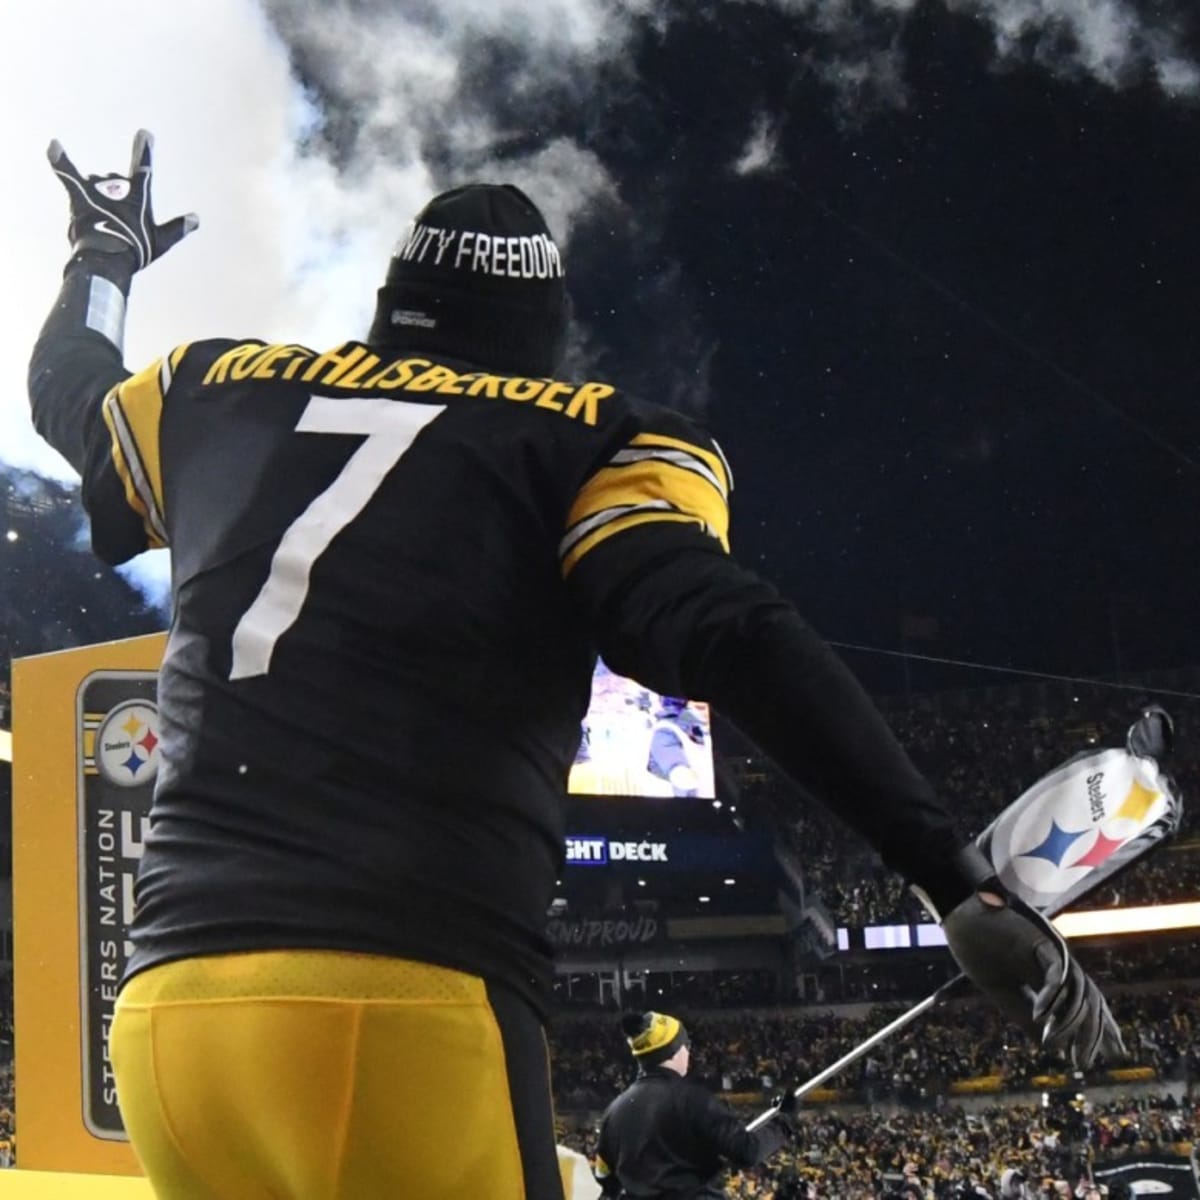 Ben Roethlisberger gets warm welcome on ice as Penguins honor